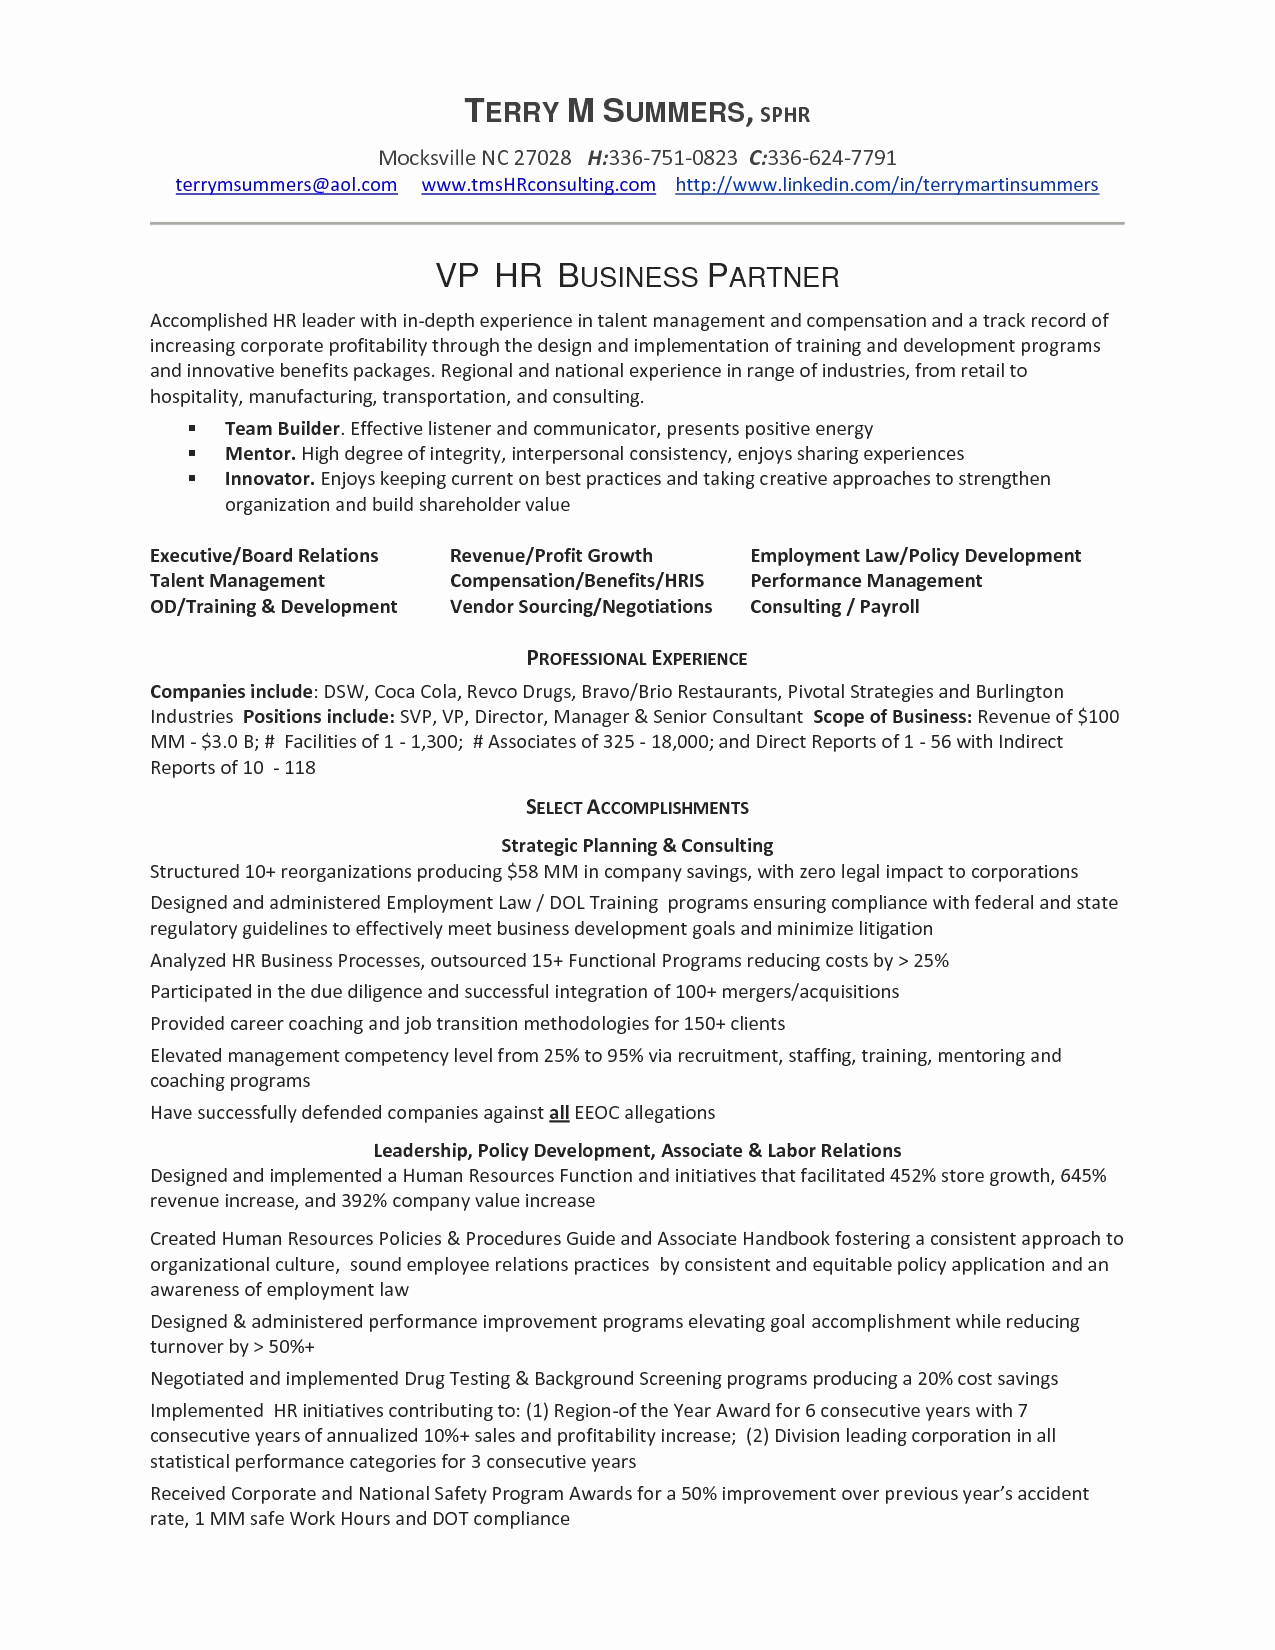 Jimmy Sweeney Cover Letter Template - Jimmy Sweeney Cover Letters Beautiful Example Business Plan